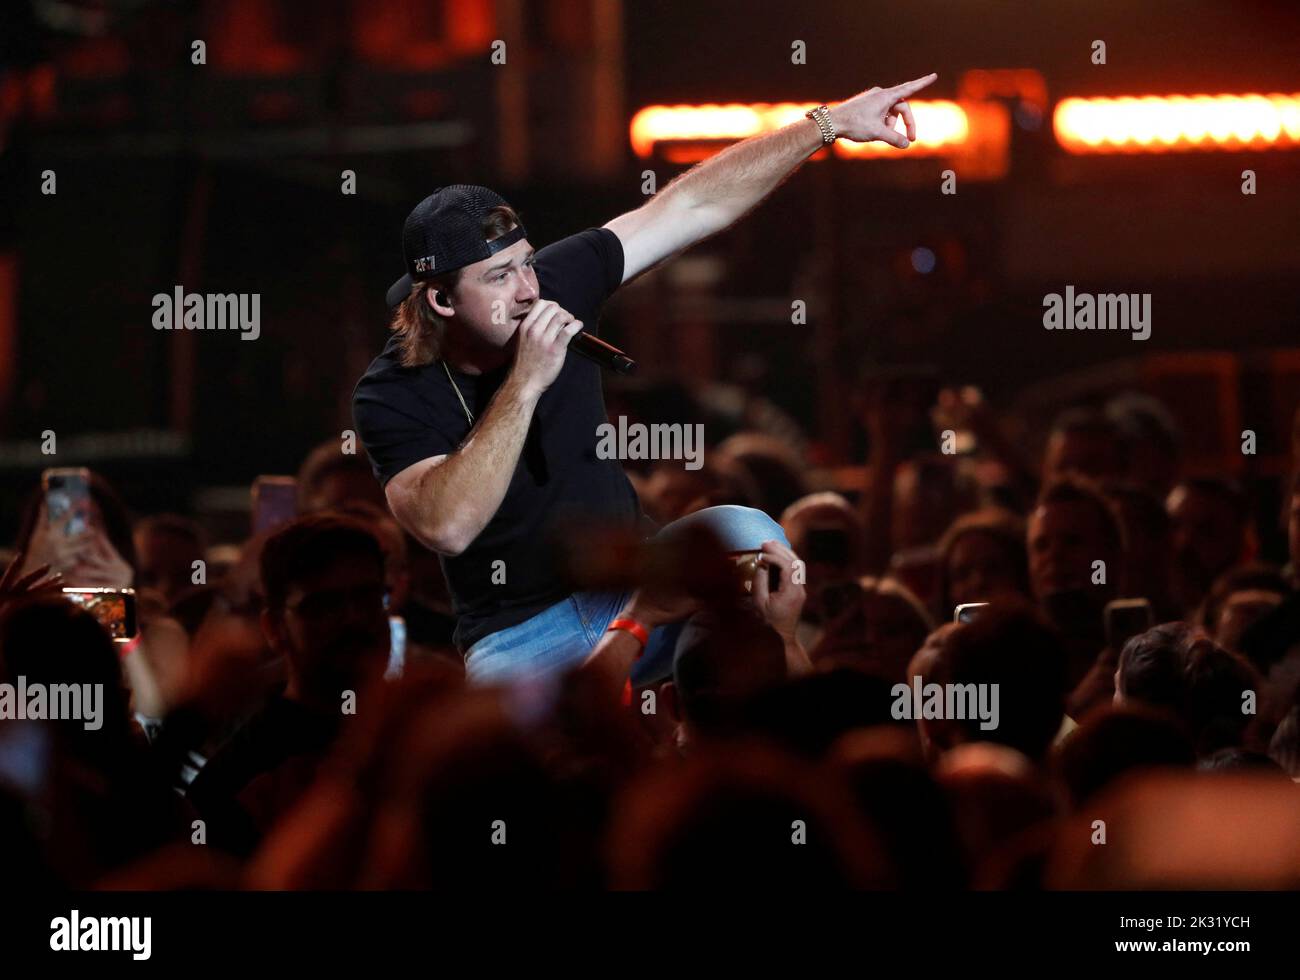 Morgan Wallen performs during the first day of the iHeartRadio Music Festival 2022 at T-Mobile Arena in Las Vegas, Nevada, U.S. September 23, 2022. REUTERS/Steve Marcus Stock Photo